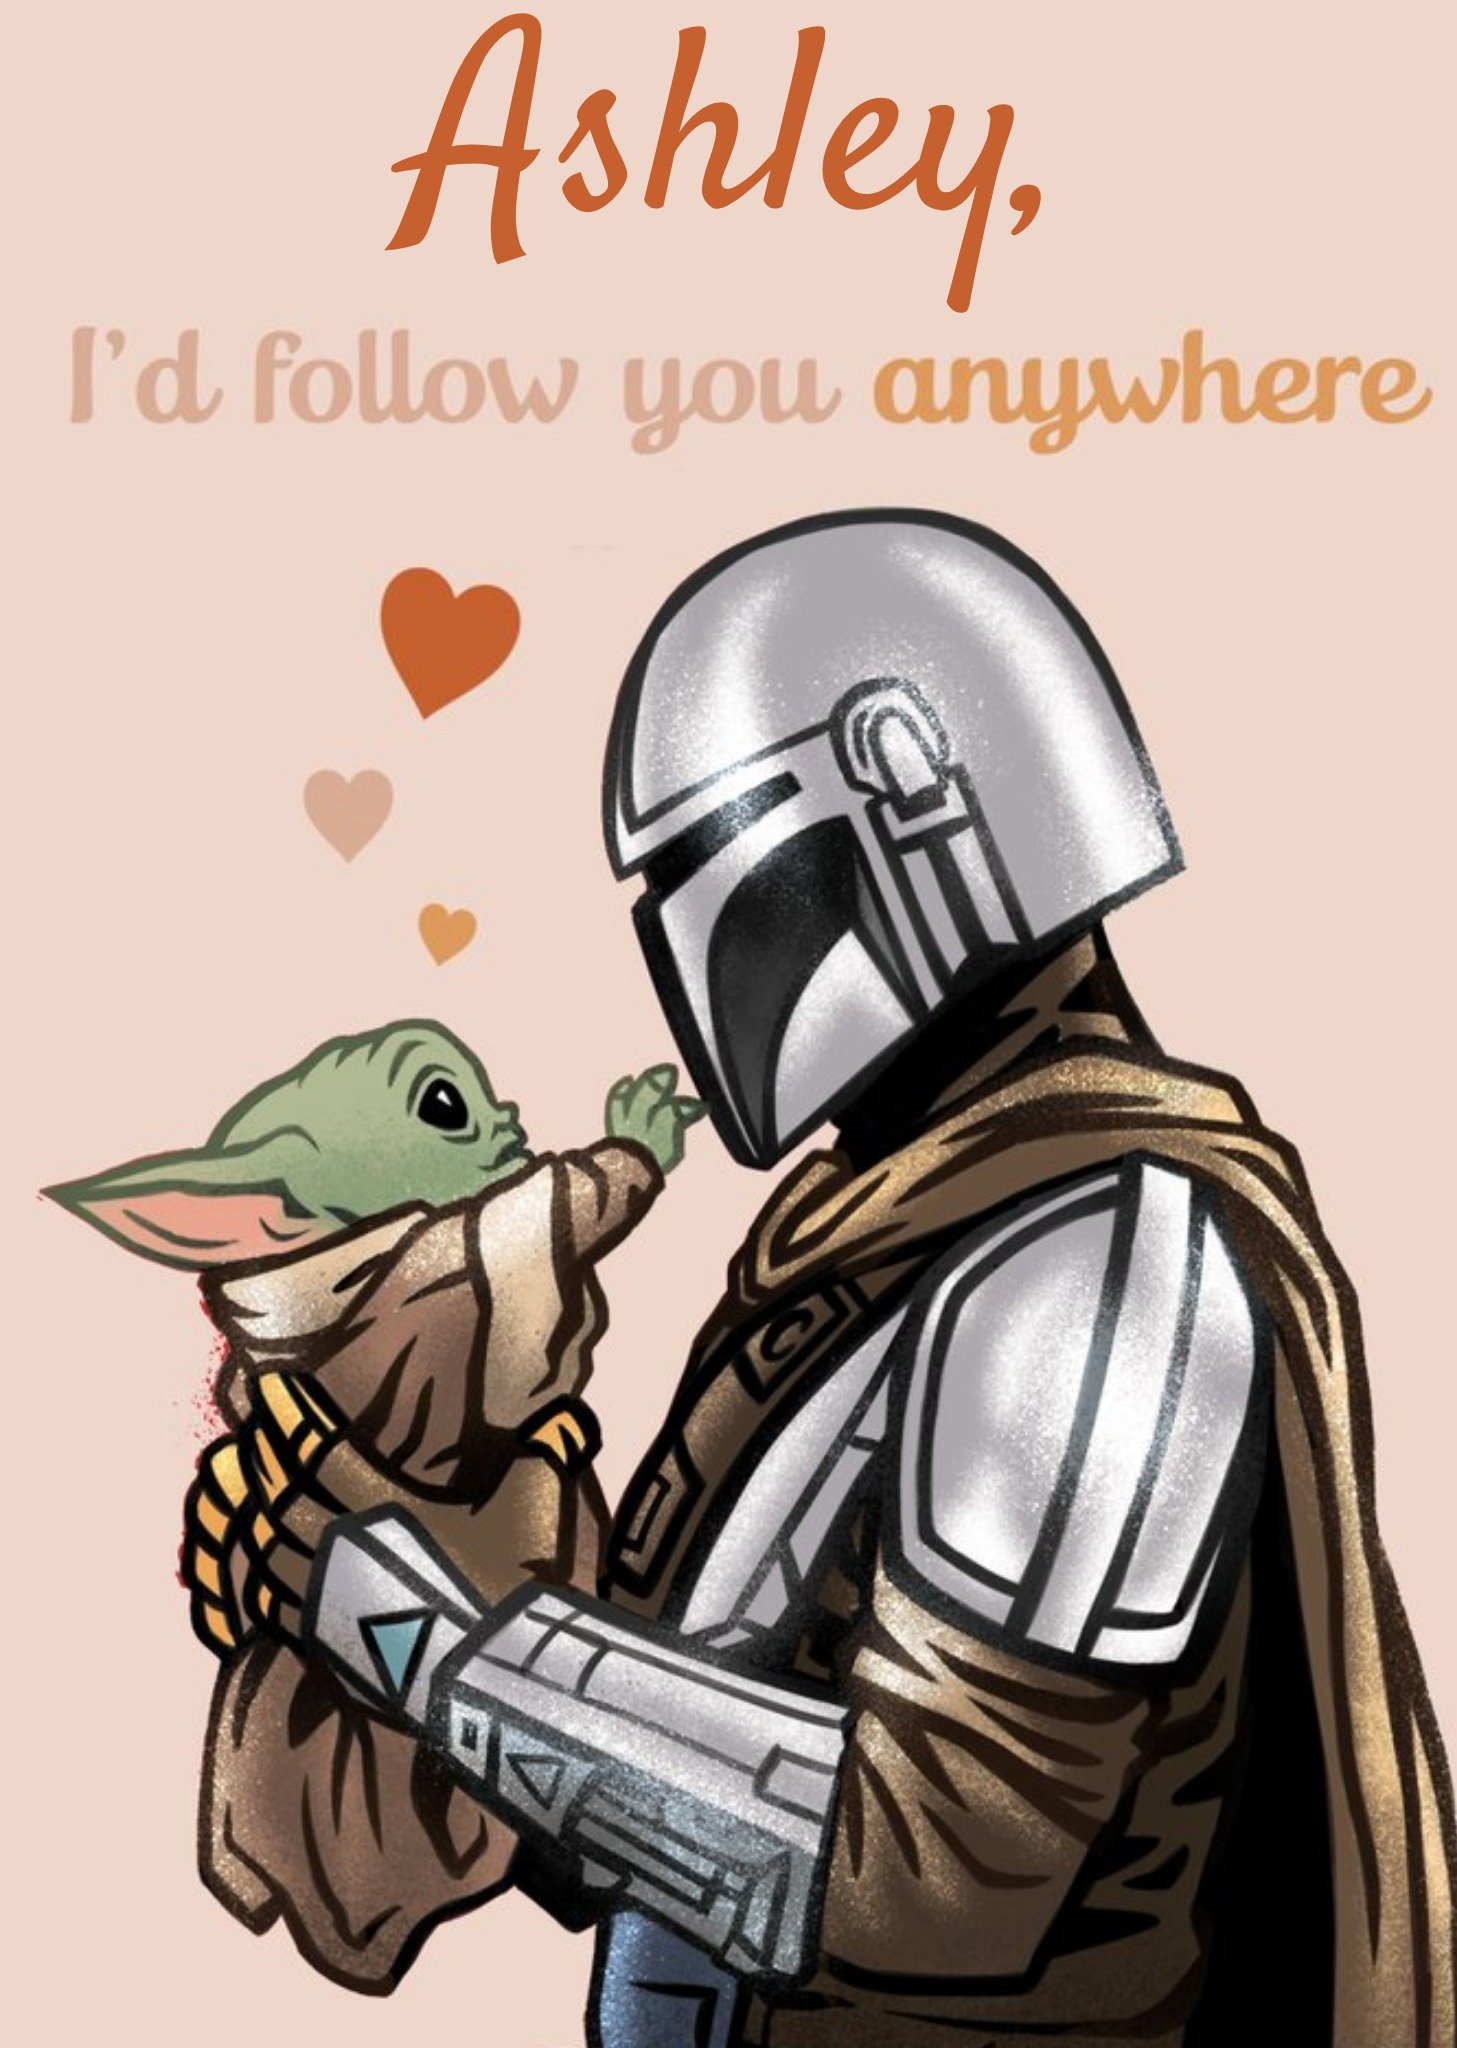 Disney Star Wars The Mandalorian Personalised Valentine Card I'd Follow You Anywhere, Large